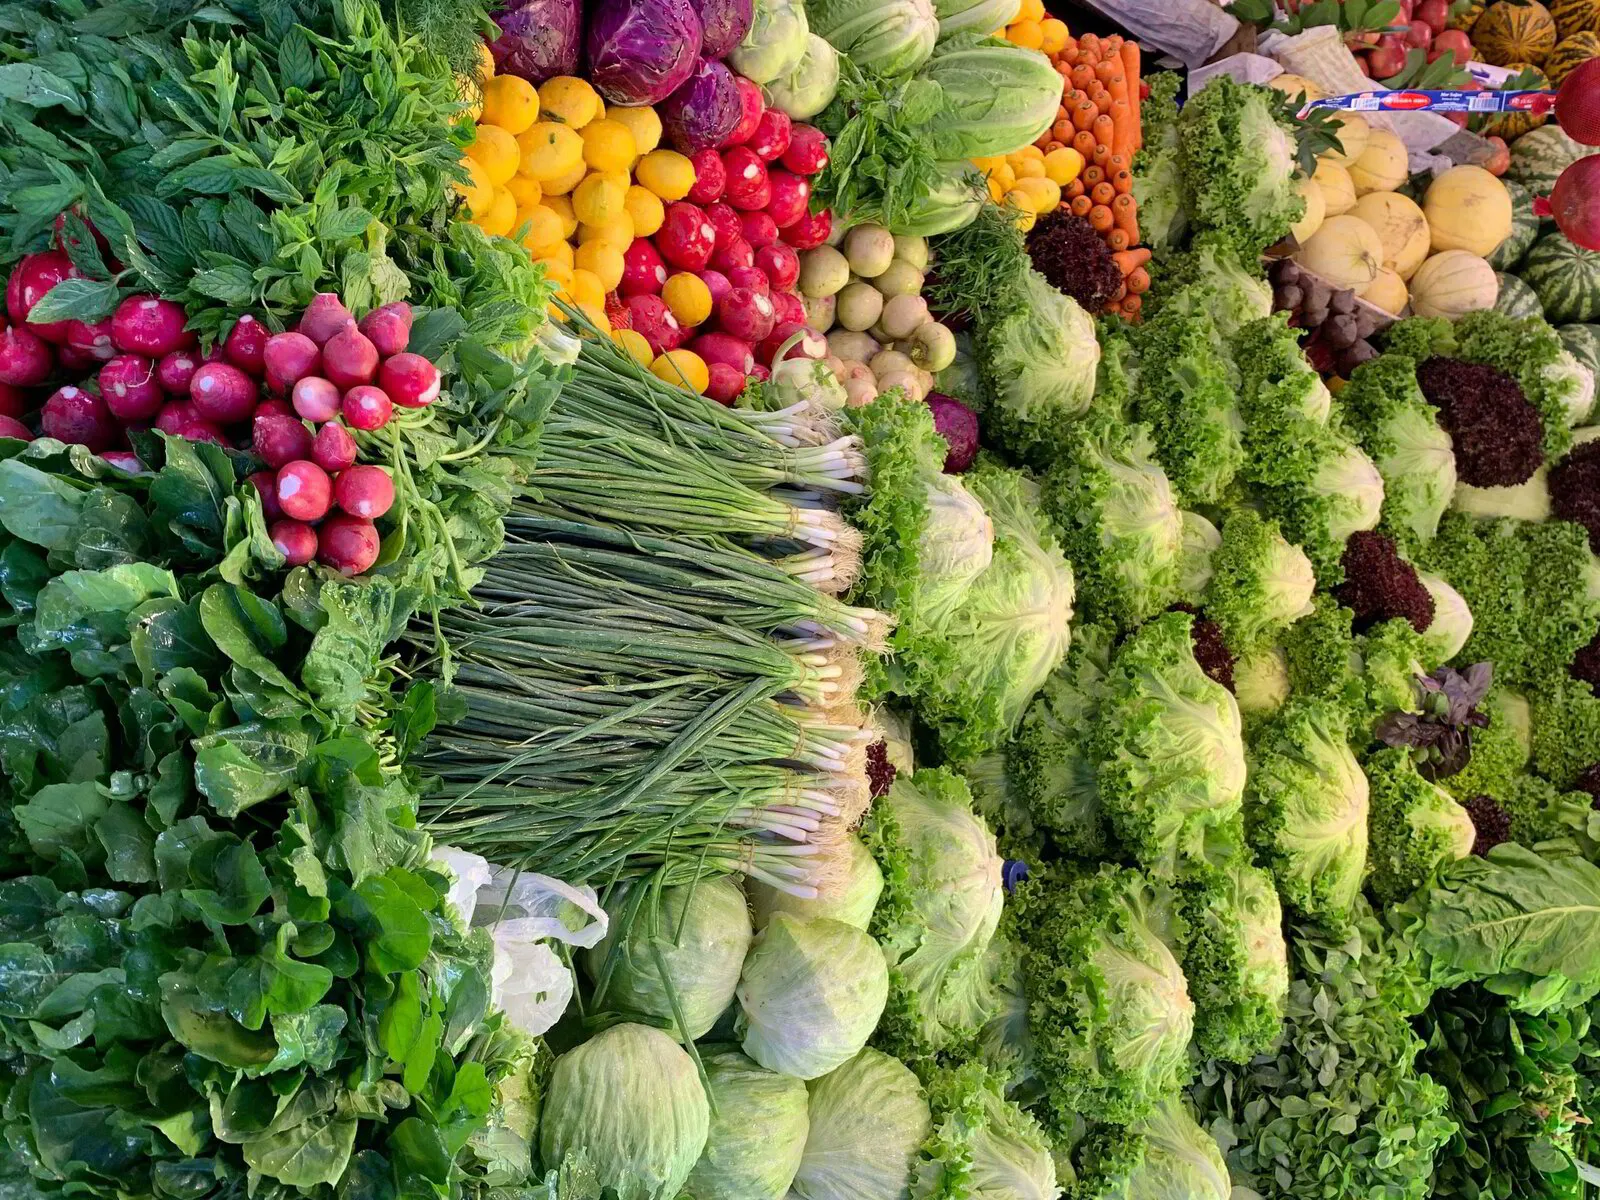 Buying Seasonal Produce lets Mother Nature write your grocery list.